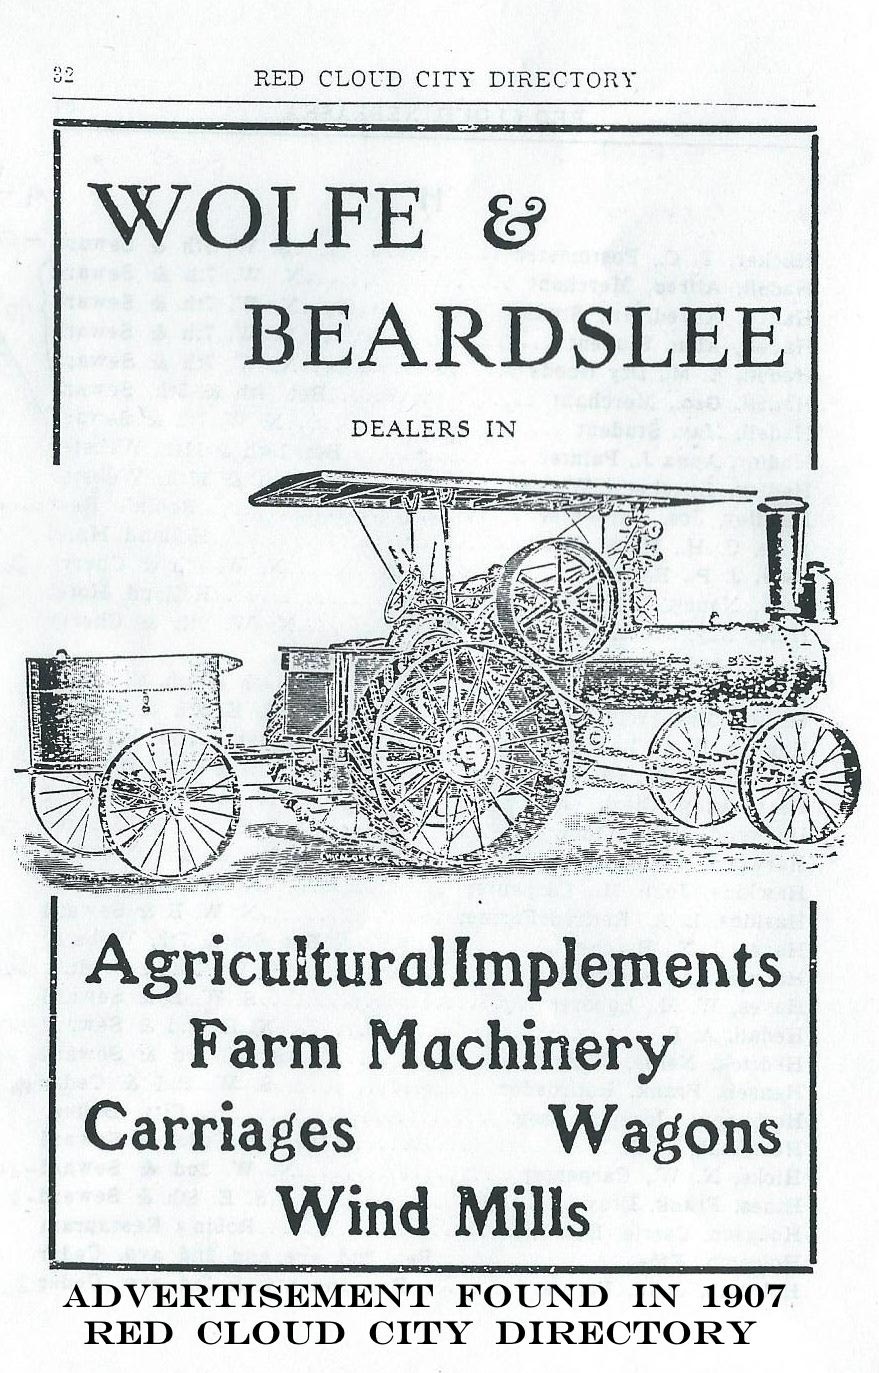 wolfe & Beardslee Adv from 1907 rc city directory